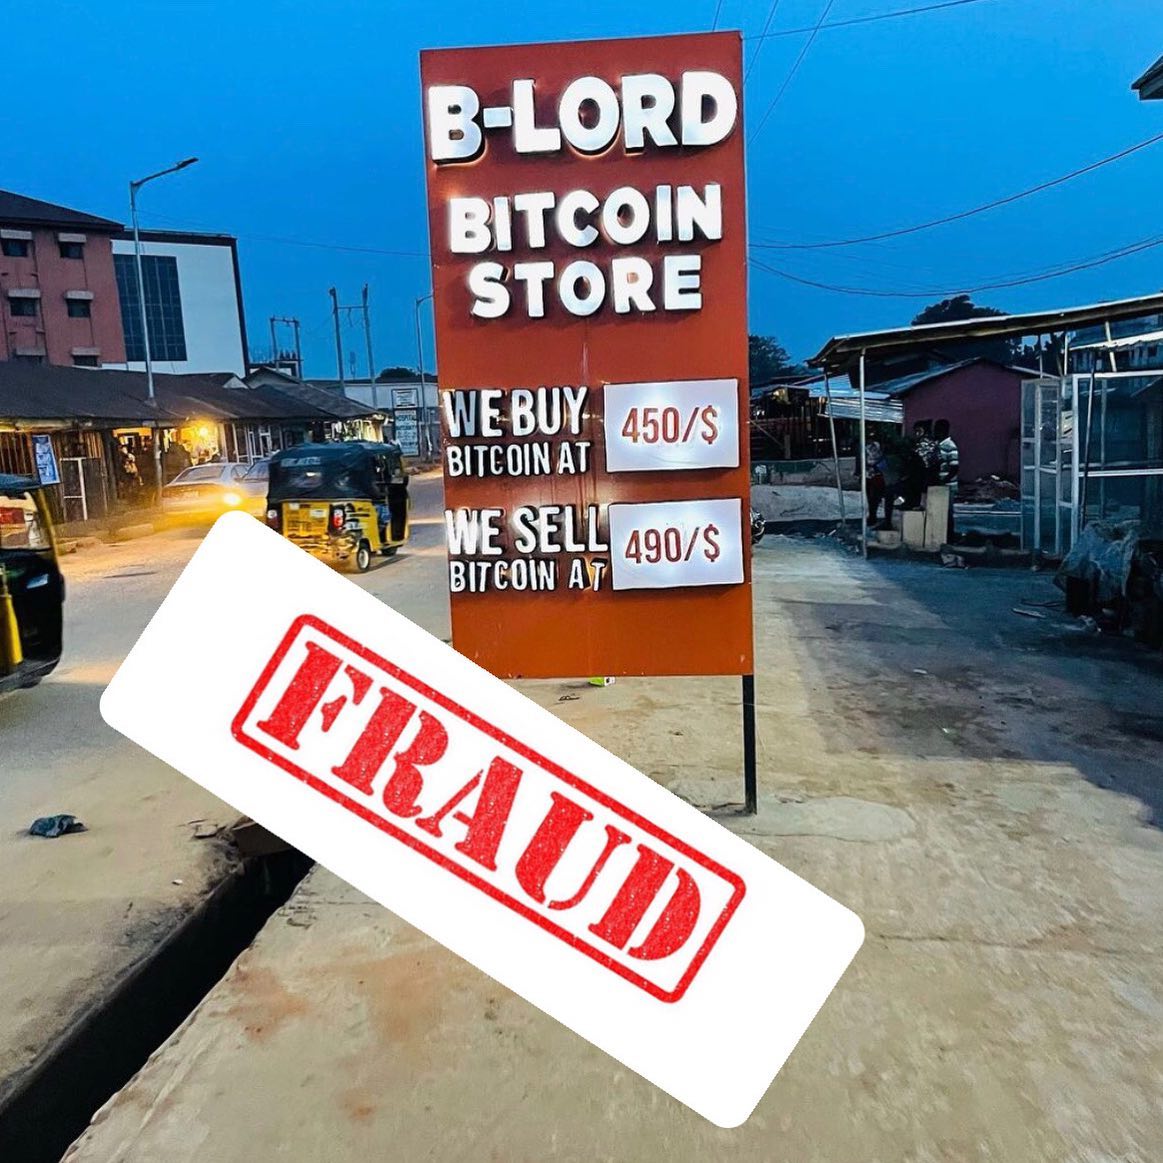 Signage of a fraud B-Lord Bitcoin store out on the street